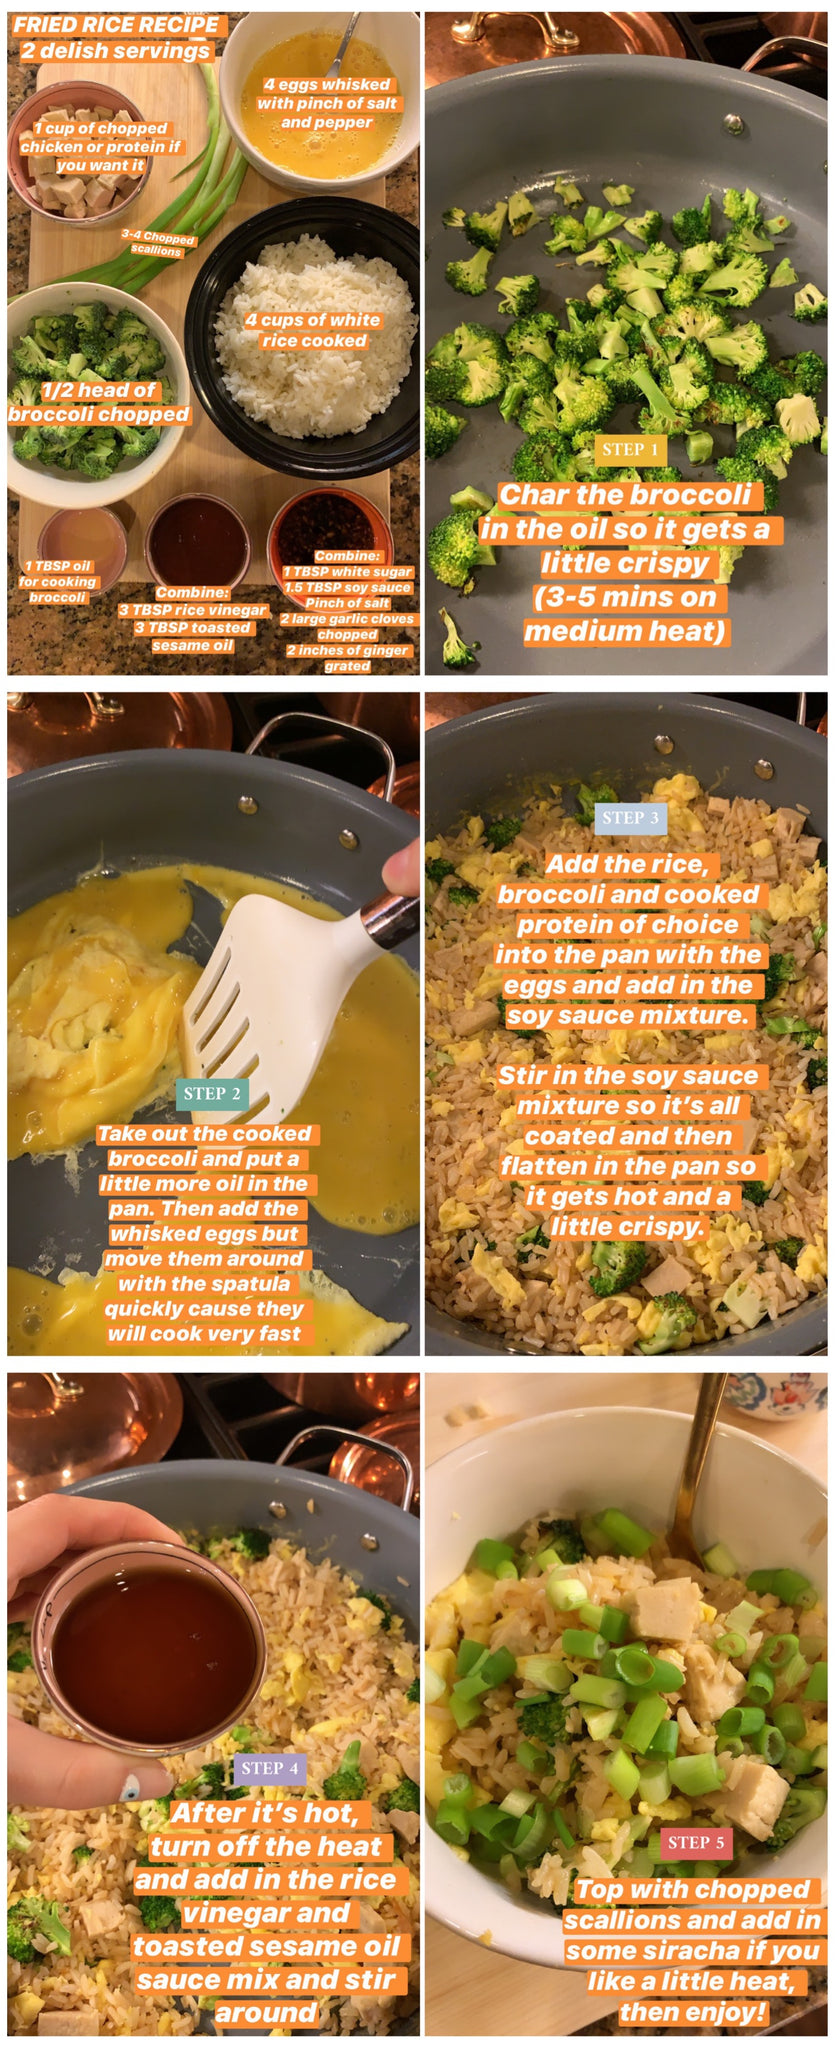 Chicken Fried Rice Recipe, easy, fast, delicious